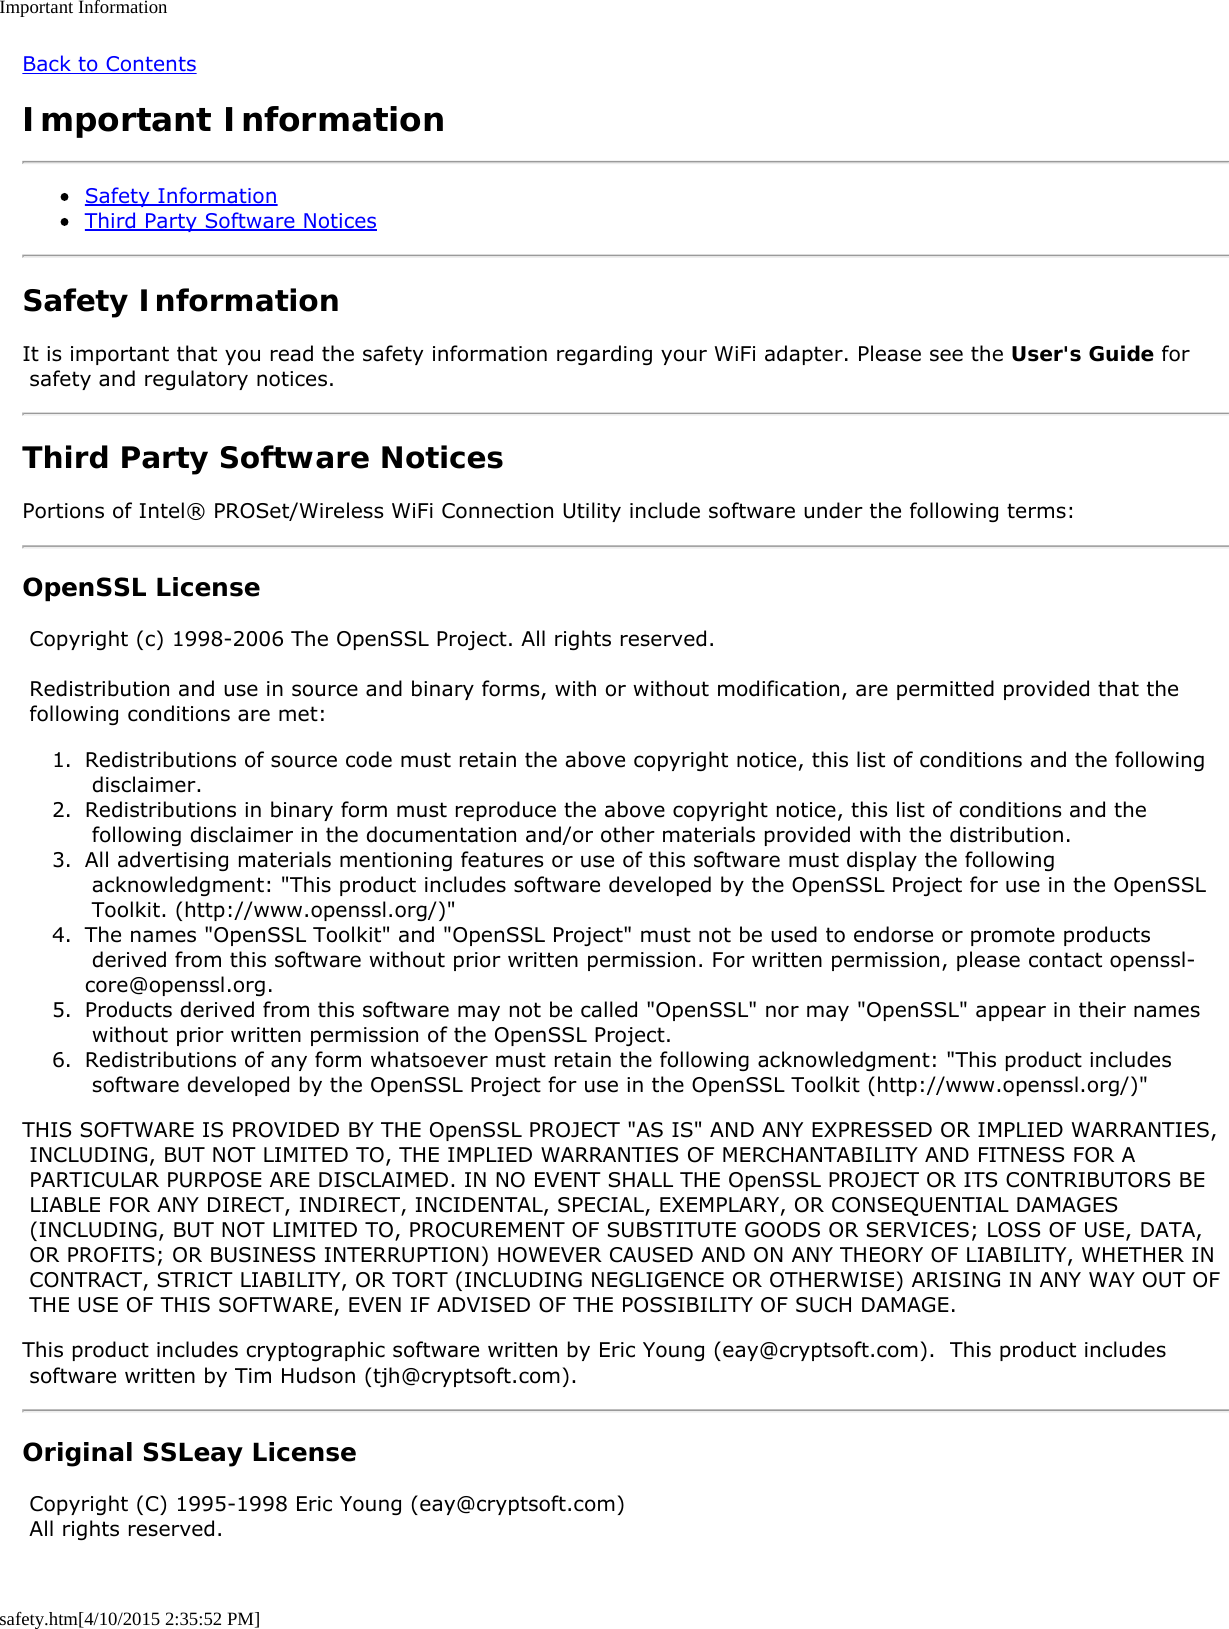 Important Informationsafety.htm[4/10/2015 2:35:52 PM]Back to ContentsImportant InformationSafety InformationThird Party Software NoticesSafety InformationIt is important that you read the safety information regarding your WiFi adapter. Please see the User&apos;s Guide for safety and regulatory notices.Third Party Software NoticesPortions of Intel® PROSet/Wireless WiFi Connection Utility include software under the following terms:OpenSSL License Copyright (c) 1998-2006 The OpenSSL Project. All rights reserved. Redistribution and use in source and binary forms, with or without modification, are permitted provided that the following conditions are met:1.  Redistributions of source code must retain the above copyright notice, this list of conditions and the following disclaimer.2.  Redistributions in binary form must reproduce the above copyright notice, this list of conditions and the following disclaimer in the documentation and/or other materials provided with the distribution.3.  All advertising materials mentioning features or use of this software must display the following acknowledgment: &quot;This product includes software developed by the OpenSSL Project for use in the OpenSSL Toolkit. (http://www.openssl.org/)&quot;4.  The names &quot;OpenSSL Toolkit&quot; and &quot;OpenSSL Project&quot; must not be used to endorse or promote products derived from this software without prior written permission. For written permission, please contact openssl-core@openssl.org.5.  Products derived from this software may not be called &quot;OpenSSL&quot; nor may &quot;OpenSSL&quot; appear in their names without prior written permission of the OpenSSL Project.6.  Redistributions of any form whatsoever must retain the following acknowledgment: &quot;This product includes software developed by the OpenSSL Project for use in the OpenSSL Toolkit (http://www.openssl.org/)&quot;THIS SOFTWARE IS PROVIDED BY THE OpenSSL PROJECT &quot;AS IS&quot; AND ANY EXPRESSED OR IMPLIED WARRANTIES, INCLUDING, BUT NOT LIMITED TO, THE IMPLIED WARRANTIES OF MERCHANTABILITY AND FITNESS FOR A PARTICULAR PURPOSE ARE DISCLAIMED. IN NO EVENT SHALL THE OpenSSL PROJECT OR ITS CONTRIBUTORS BE LIABLE FOR ANY DIRECT, INDIRECT, INCIDENTAL, SPECIAL, EXEMPLARY, OR CONSEQUENTIAL DAMAGES (INCLUDING, BUT NOT LIMITED TO, PROCUREMENT OF SUBSTITUTE GOODS OR SERVICES; LOSS OF USE, DATA, OR PROFITS; OR BUSINESS INTERRUPTION) HOWEVER CAUSED AND ON ANY THEORY OF LIABILITY, WHETHER IN CONTRACT, STRICT LIABILITY, OR TORT (INCLUDING NEGLIGENCE OR OTHERWISE) ARISING IN ANY WAY OUT OF THE USE OF THIS SOFTWARE, EVEN IF ADVISED OF THE POSSIBILITY OF SUCH DAMAGE.This product includes cryptographic software written by Eric Young (eay@cryptsoft.com).  This product includes software written by Tim Hudson (tjh@cryptsoft.com).Original SSLeay License Copyright (C) 1995-1998 Eric Young (eay@cryptsoft.com) All rights reserved.